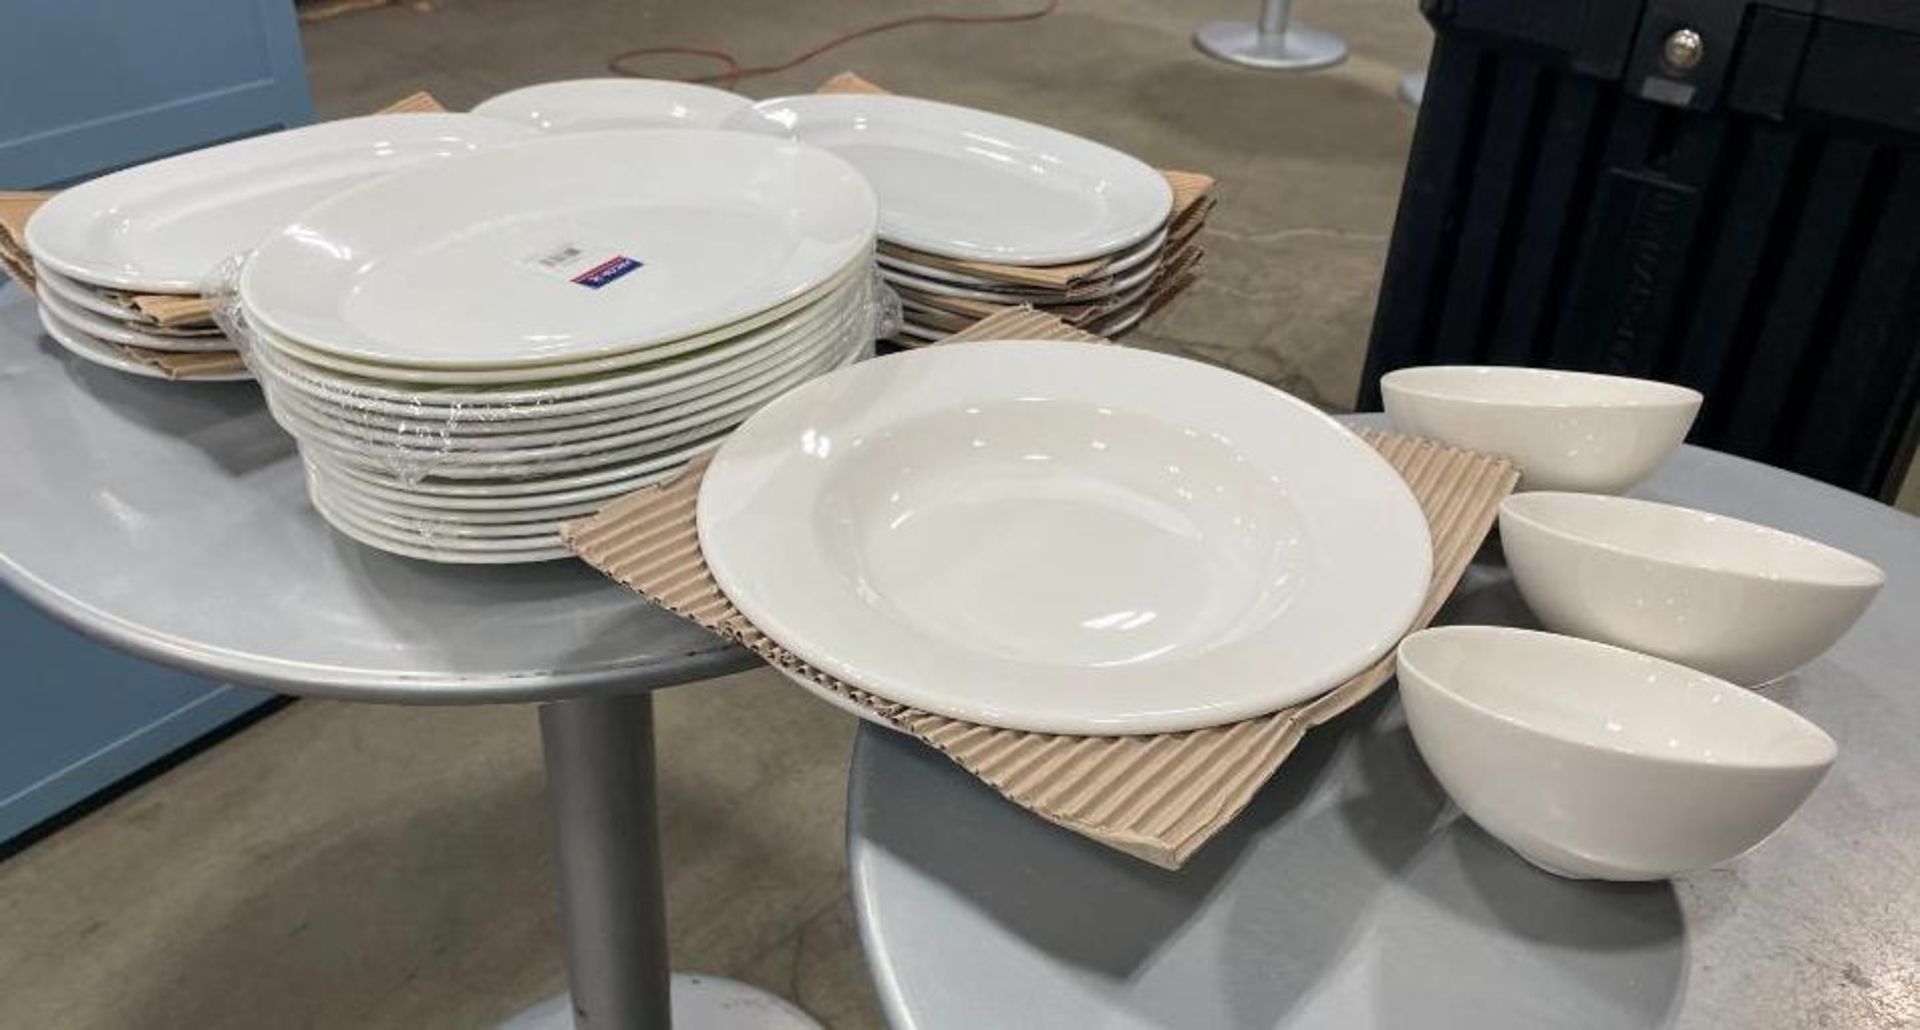 30 PIECES OF ASSORTED ARCOROC DINNERWARE - Image 2 of 4